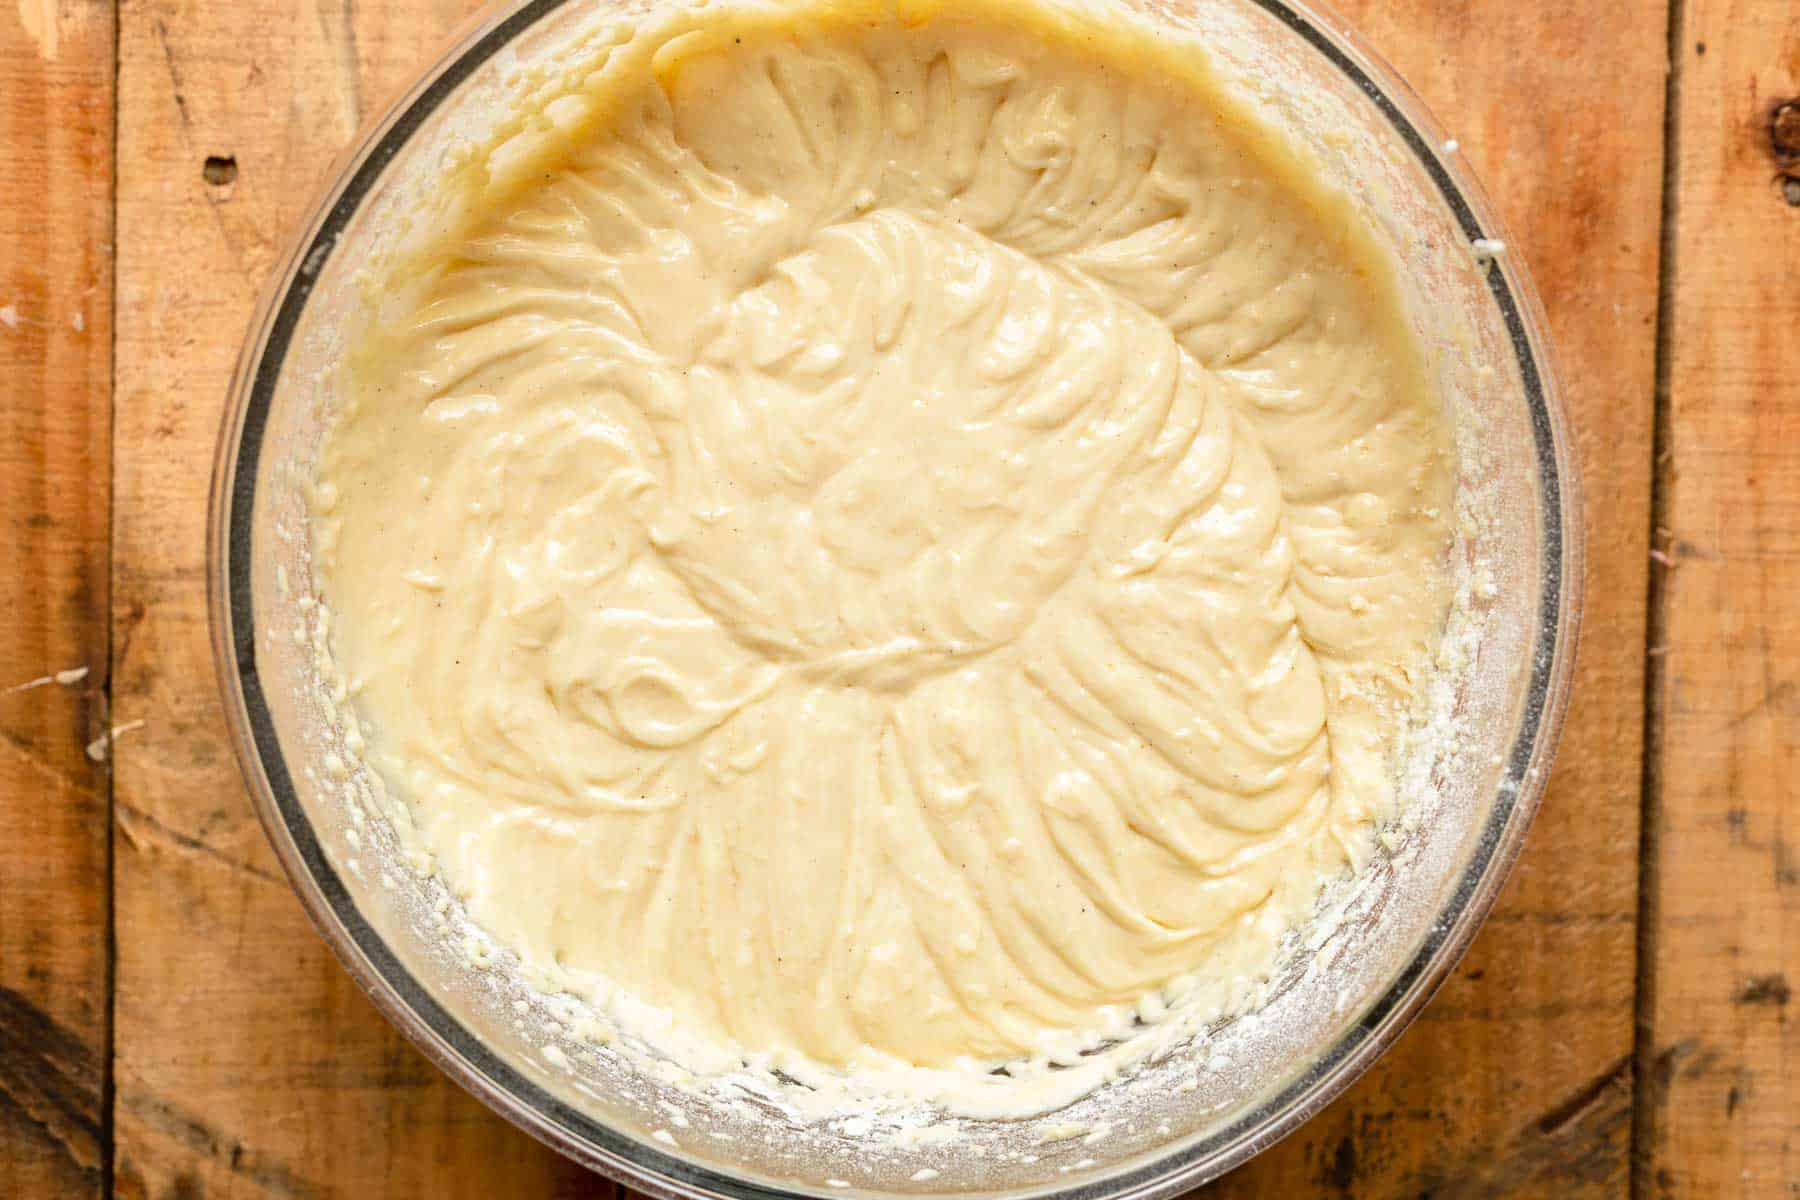 mixed, thick cake batter in a large mixing bowl